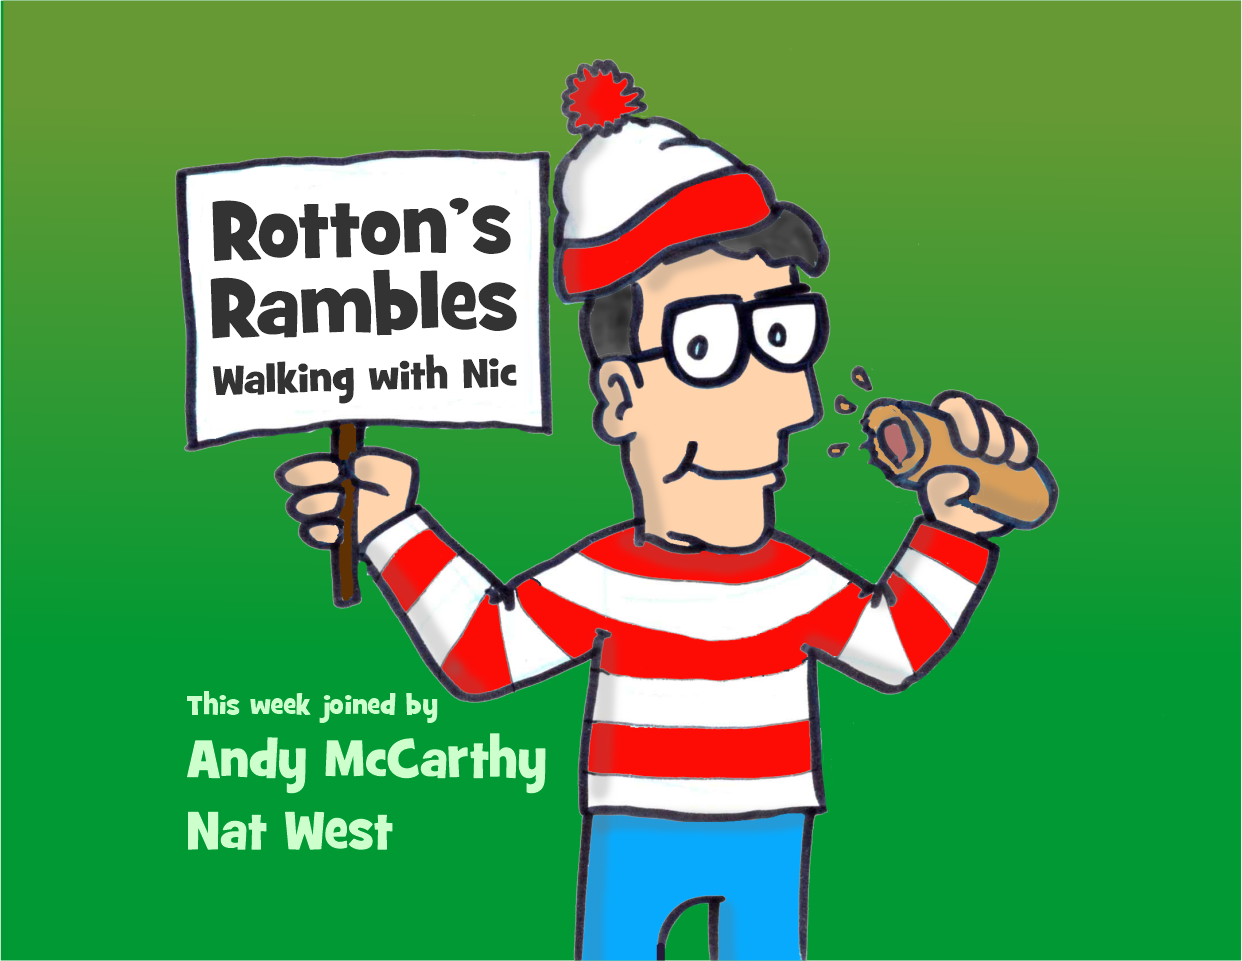 Rotton's Ramble with Andy McCarthy